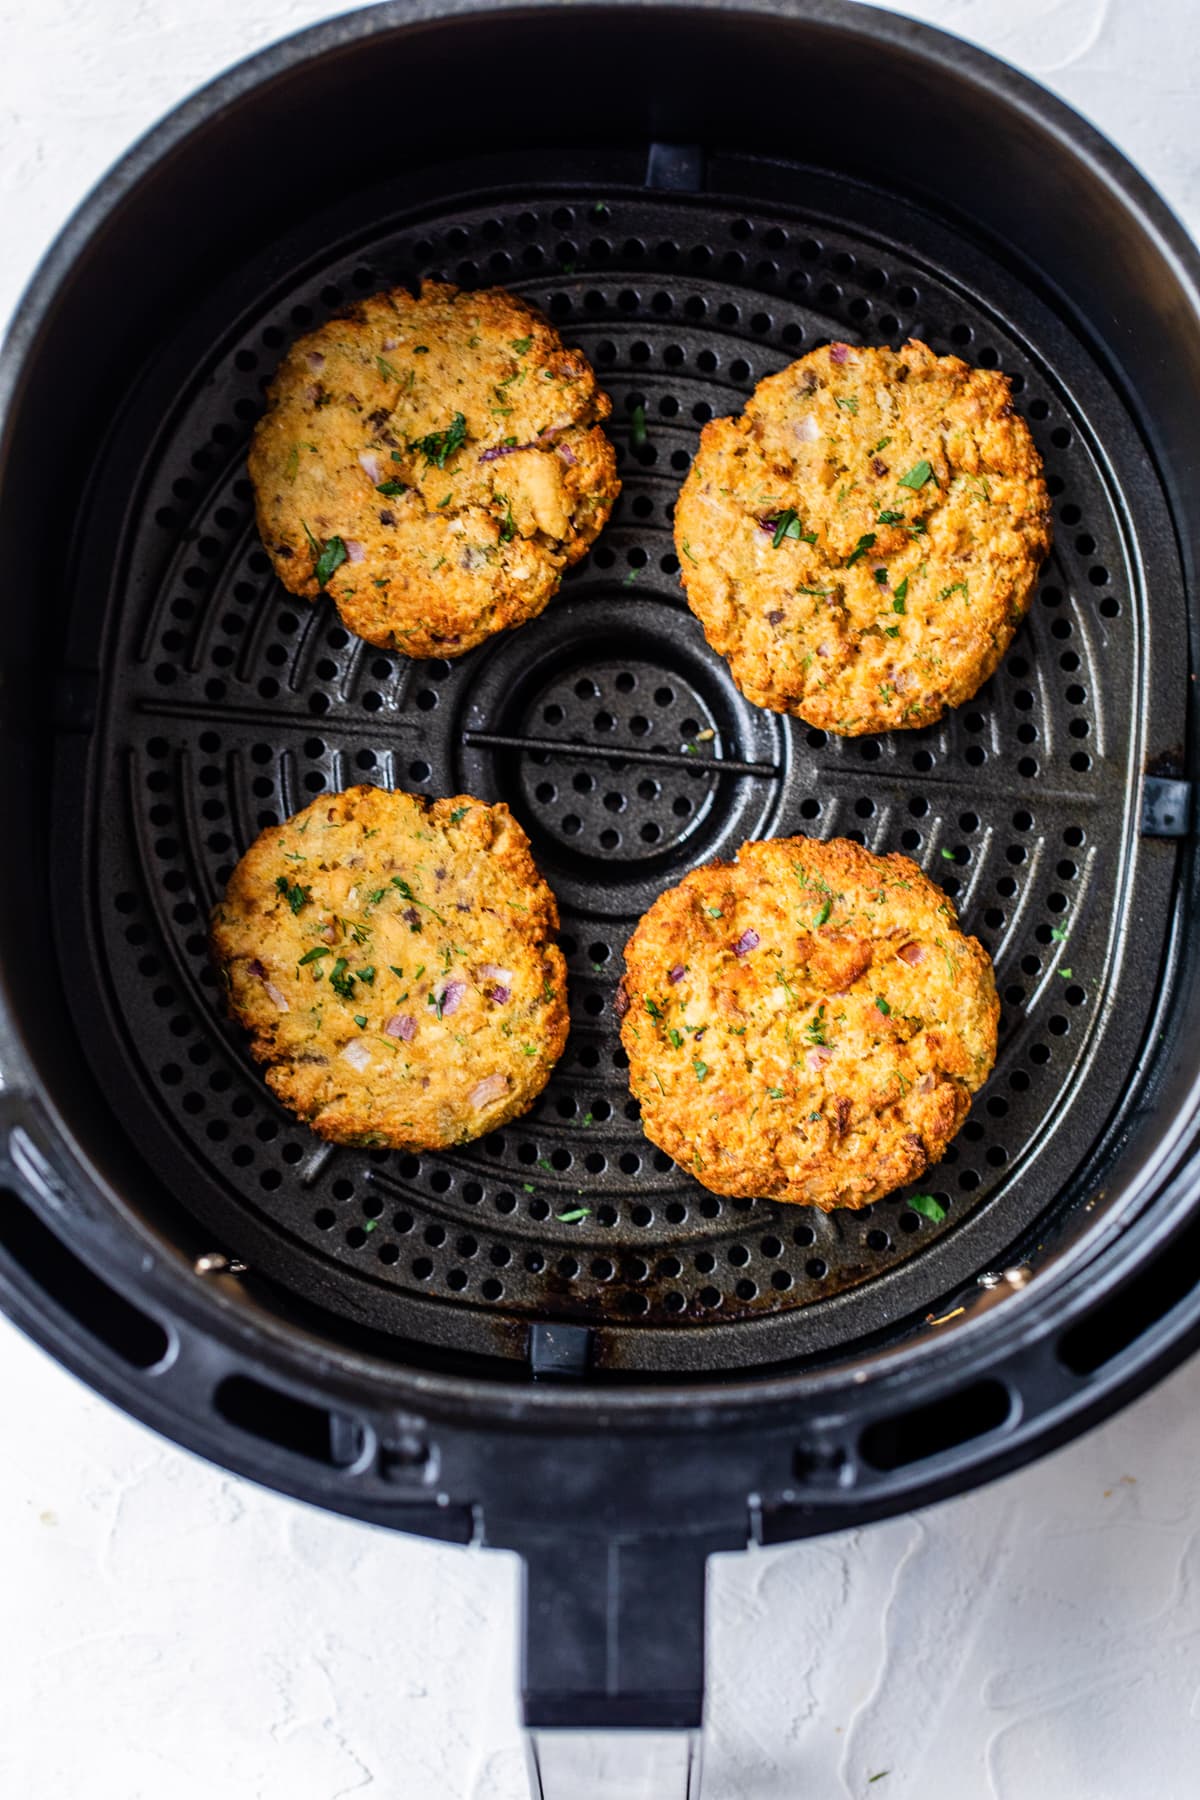 How To Cook Salmon Burgers In Air Fryer